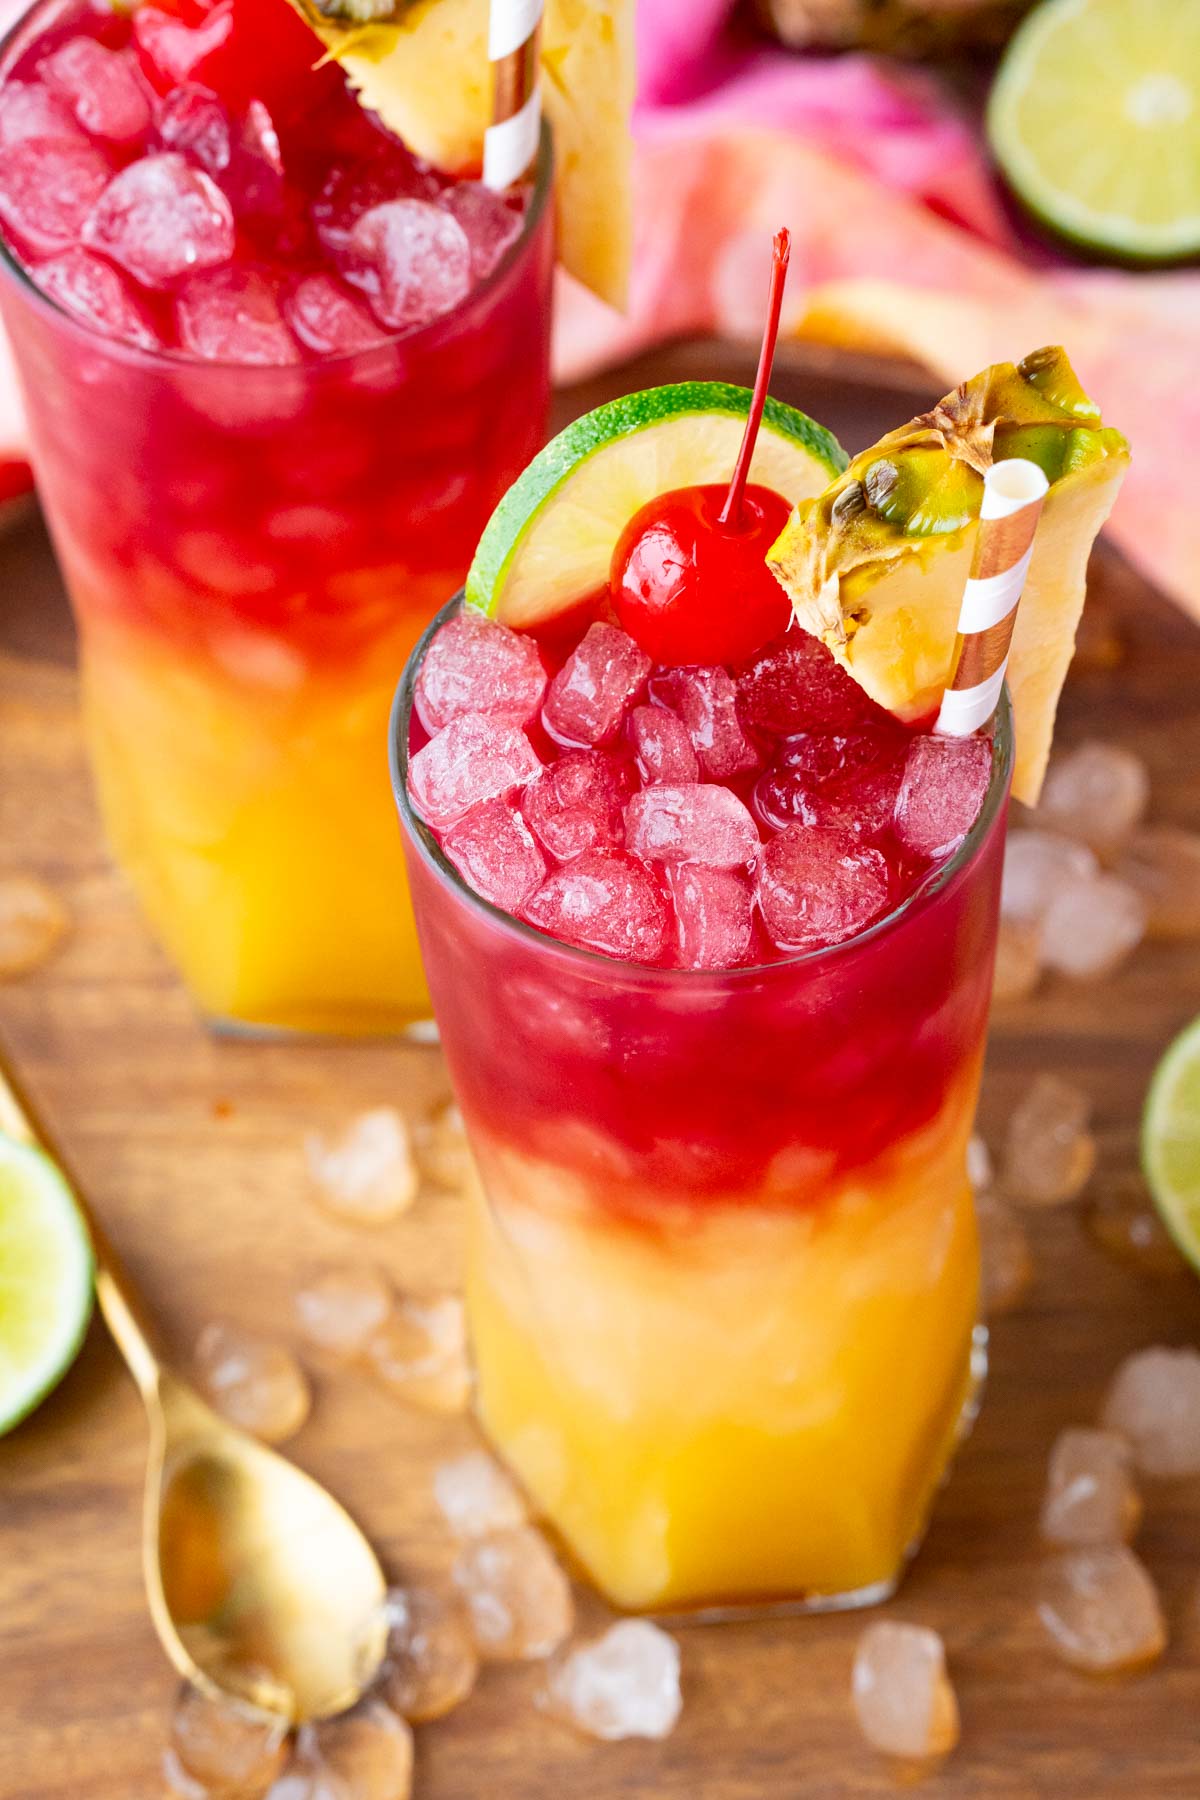 Close up photo of a Malibu Bay Breeze drink garnished with pineapple, cherry, and lime.